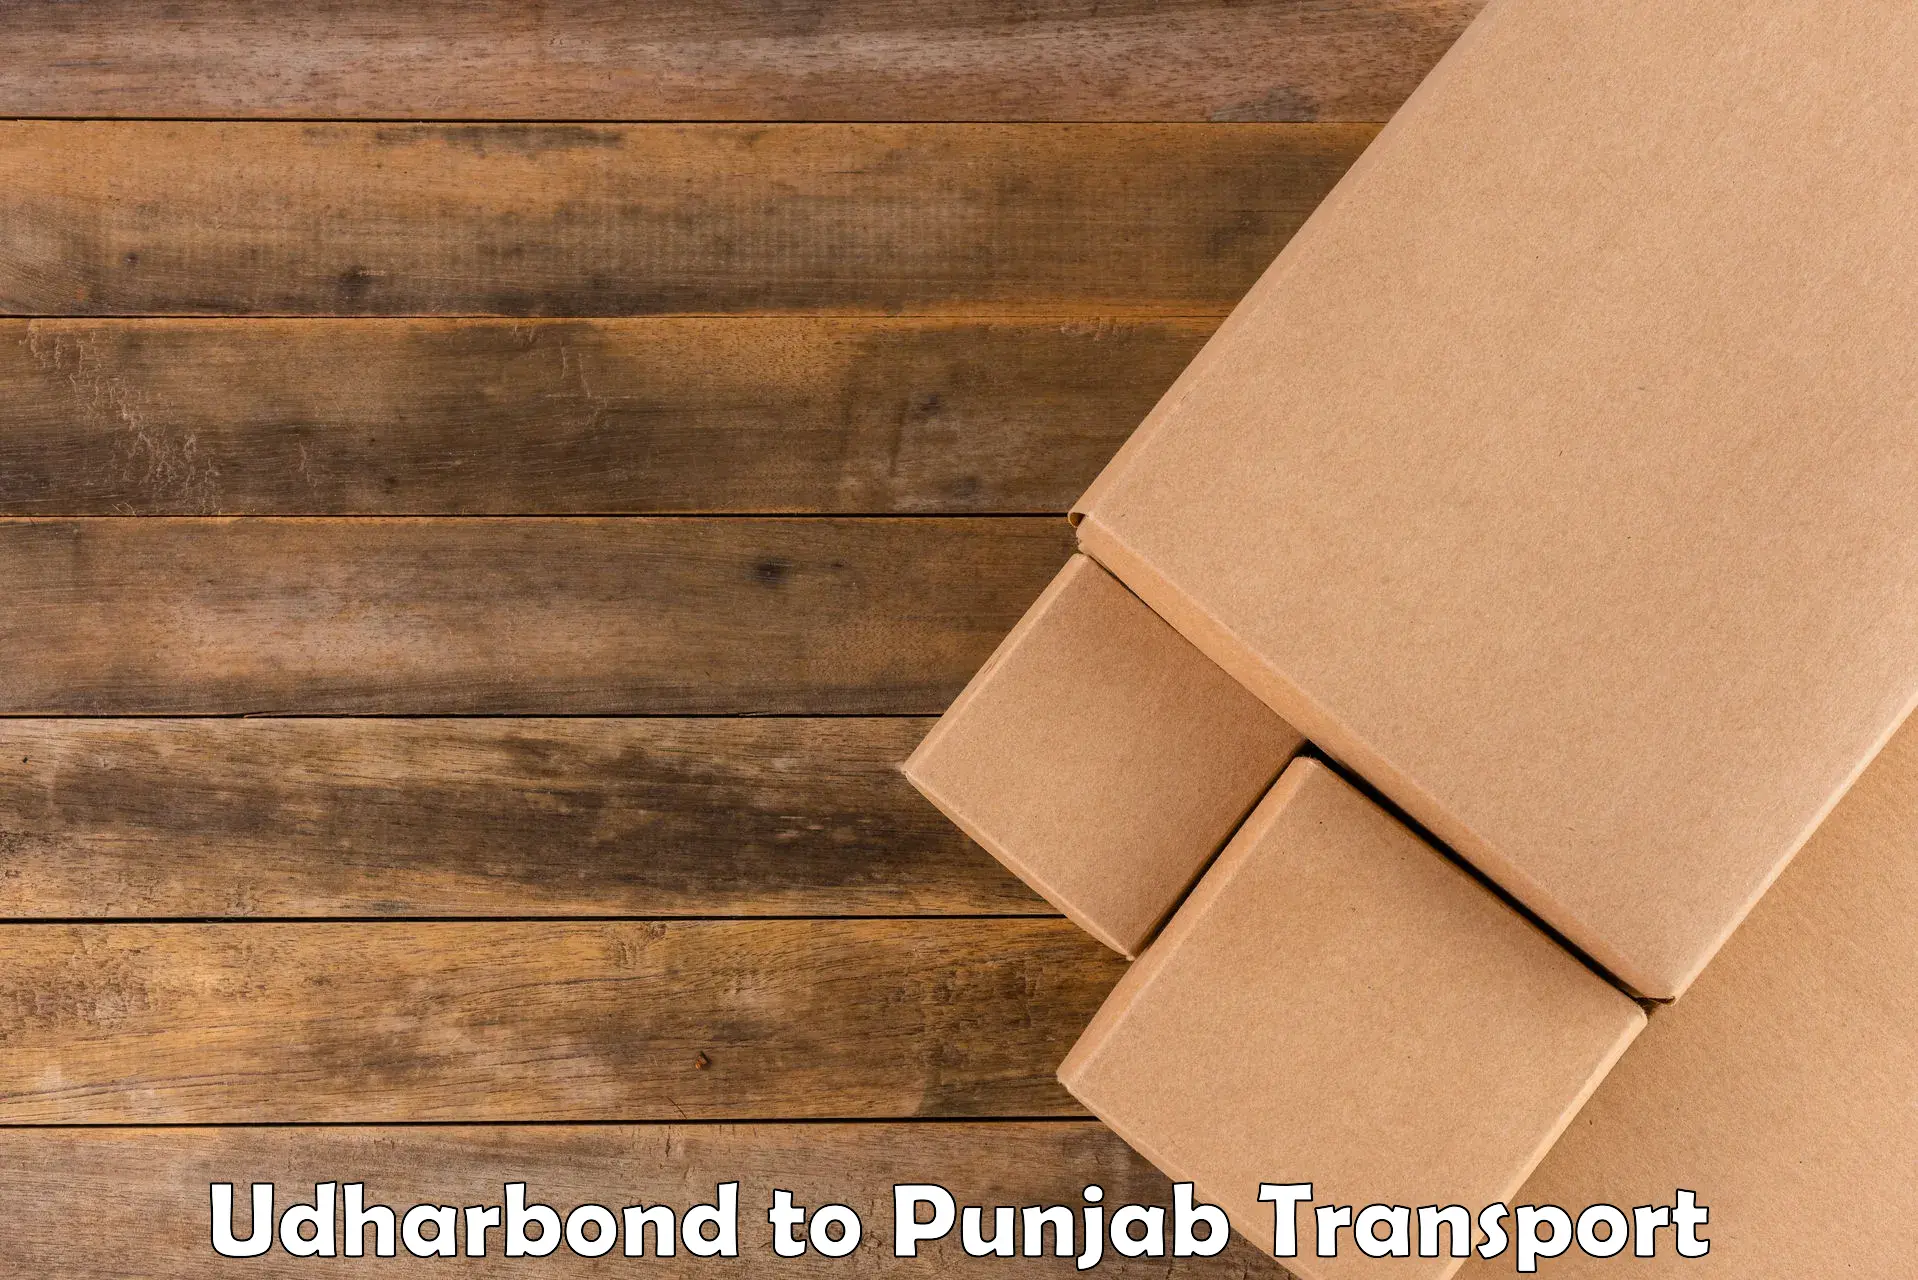 Commercial transport service in Udharbond to Dera Bassi